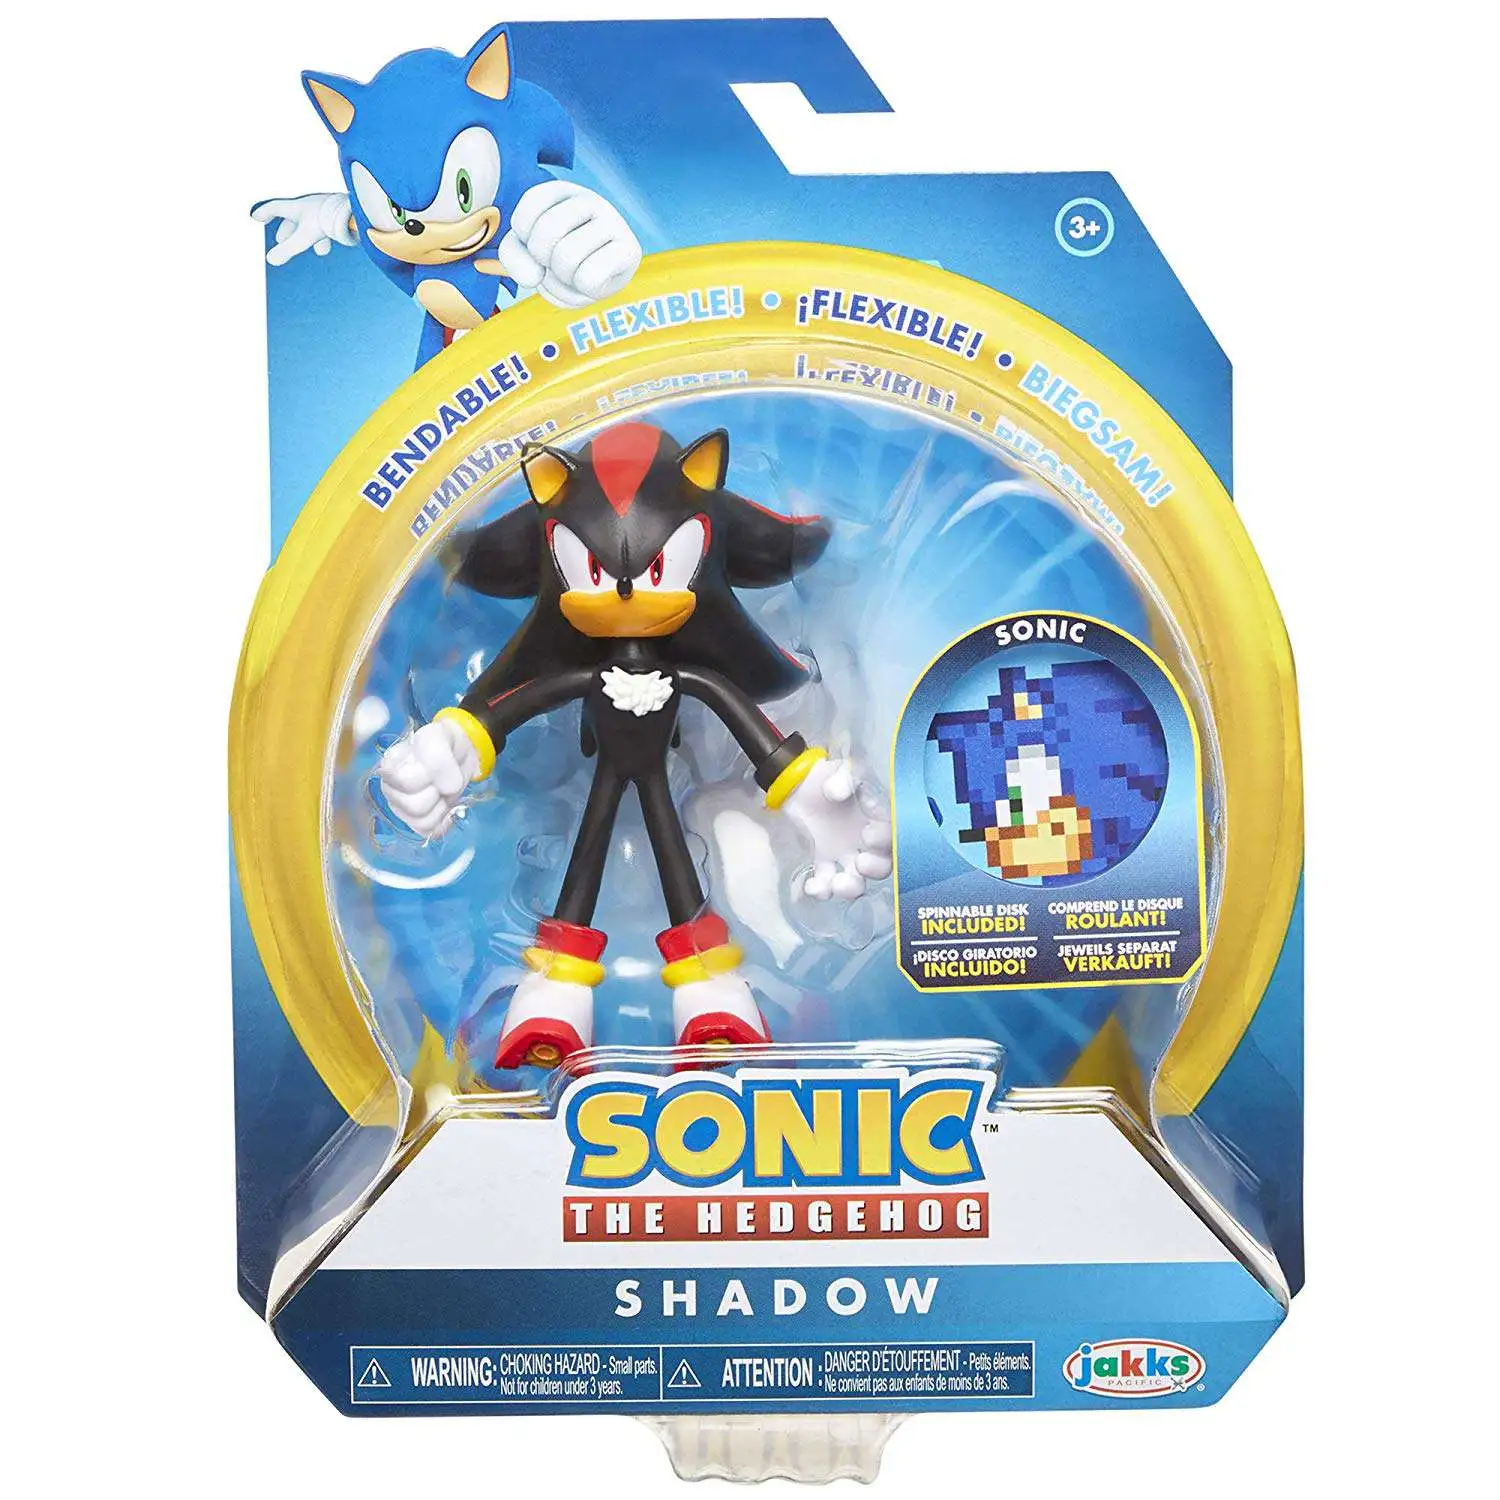 TOMY Sonic Boom Figure 2 Pack, Shadow and Sonic